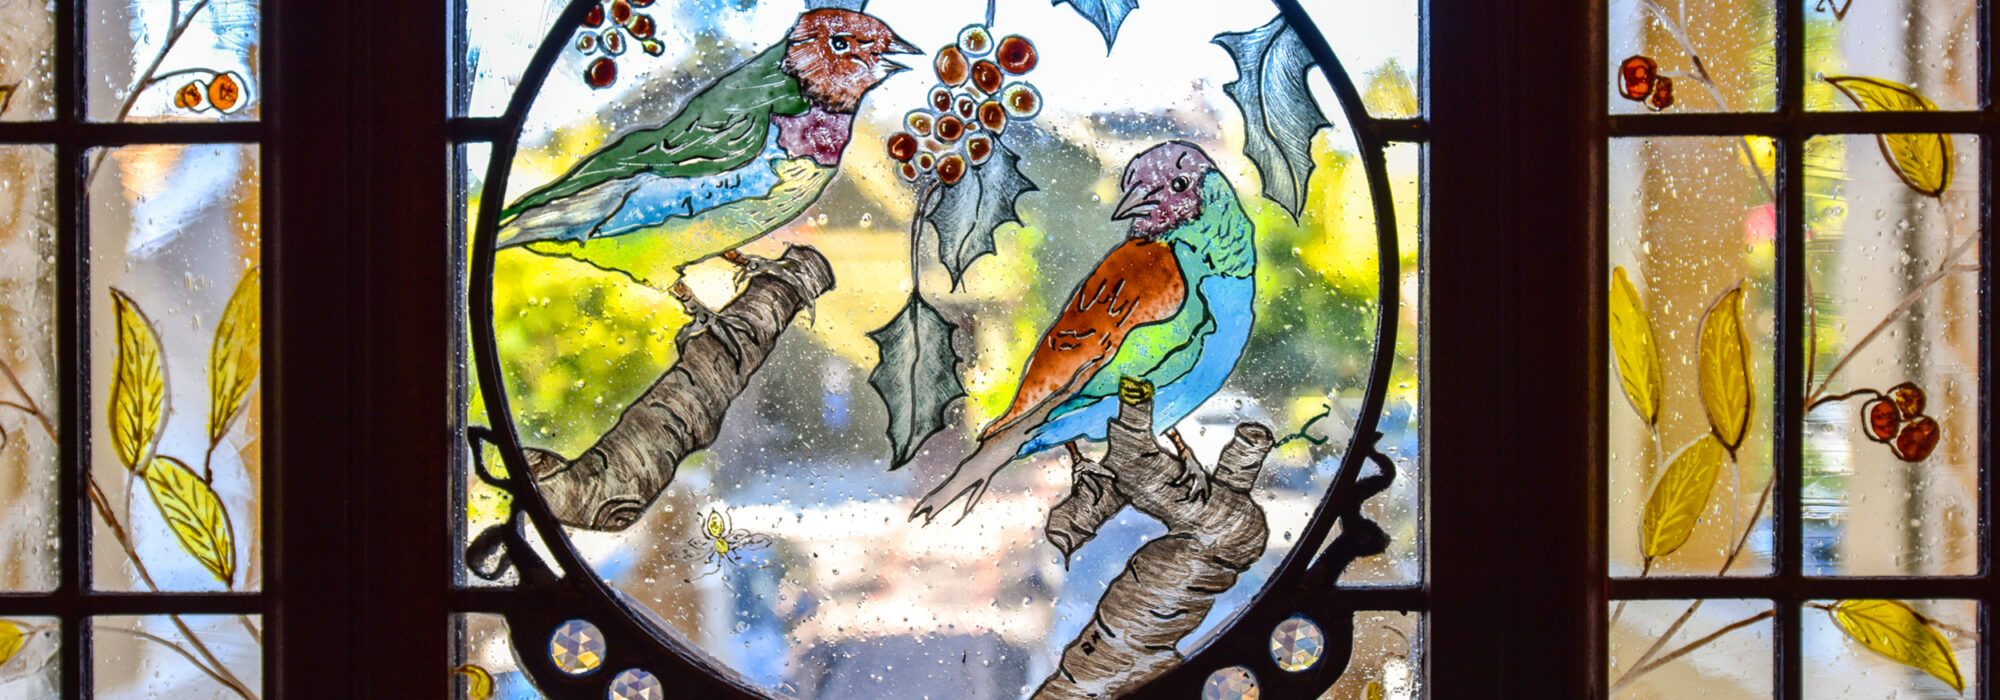 A Stained Glass Detail from The Finch Guest House's Front Door Features Hand-Painted Birds and Plants.